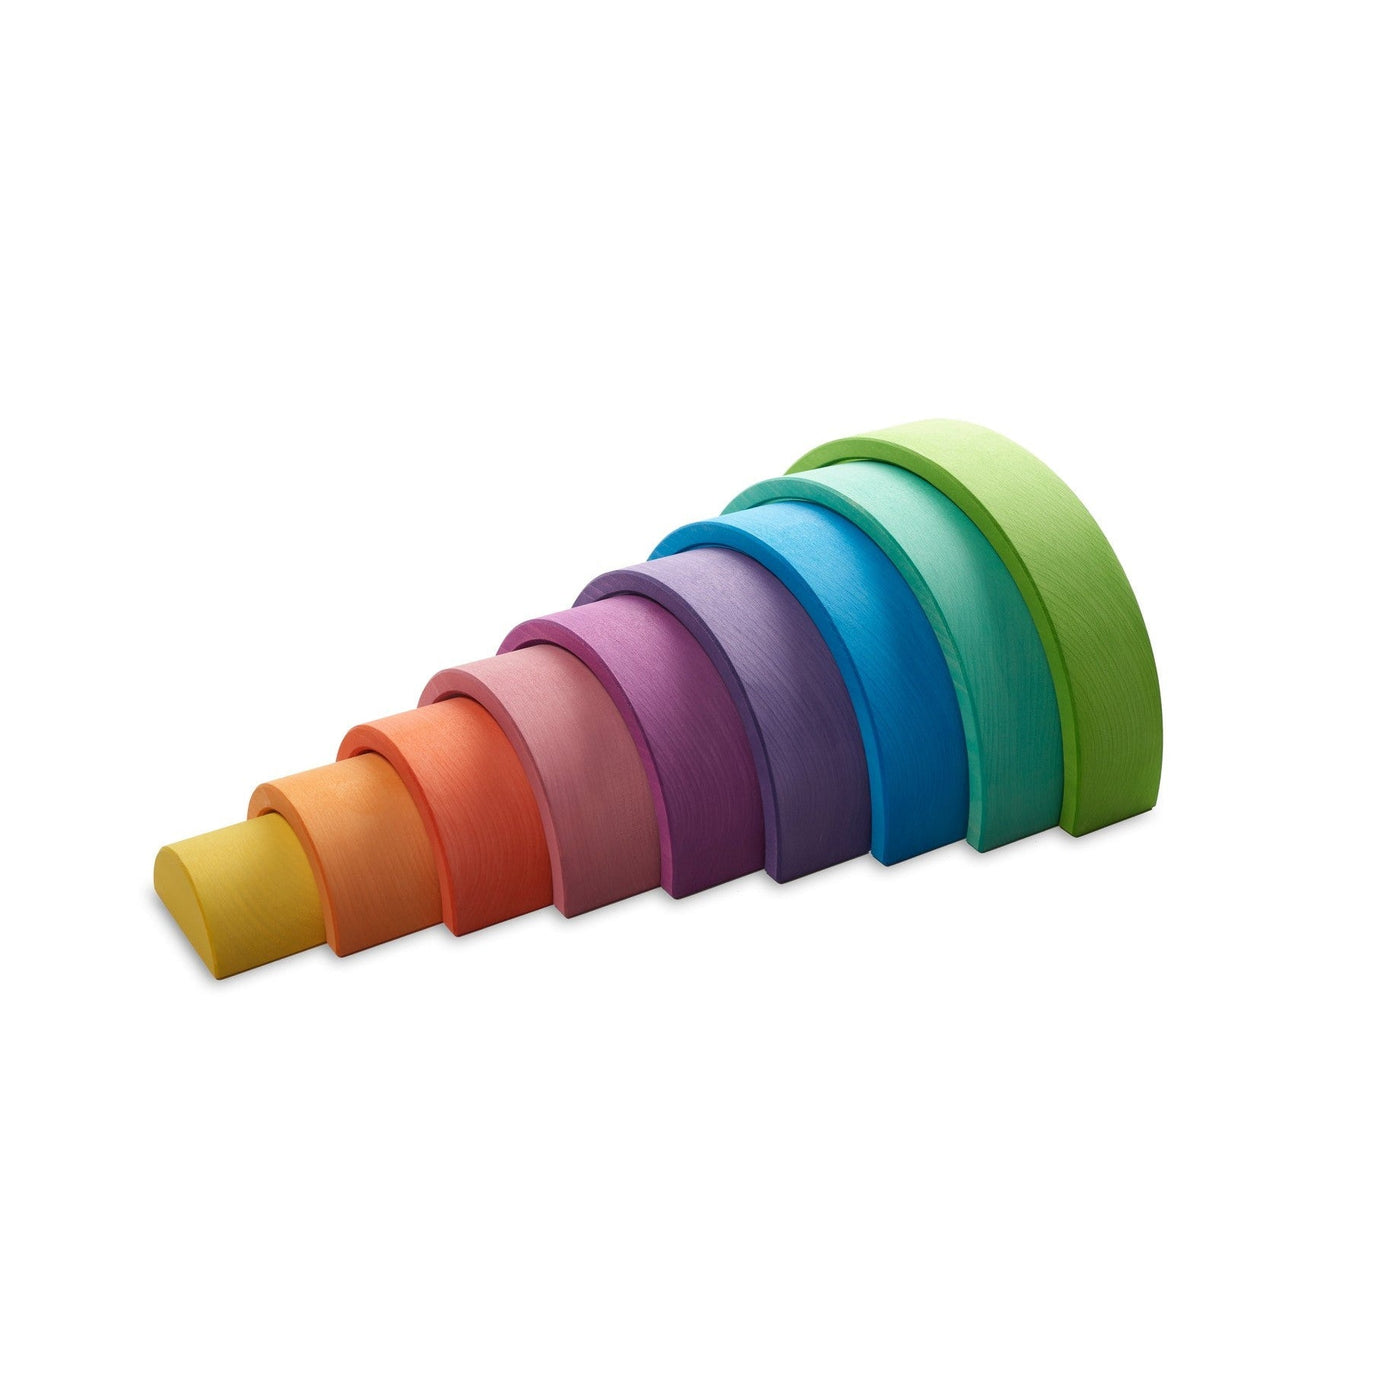 9 Piece Arch Stacking Rainbow